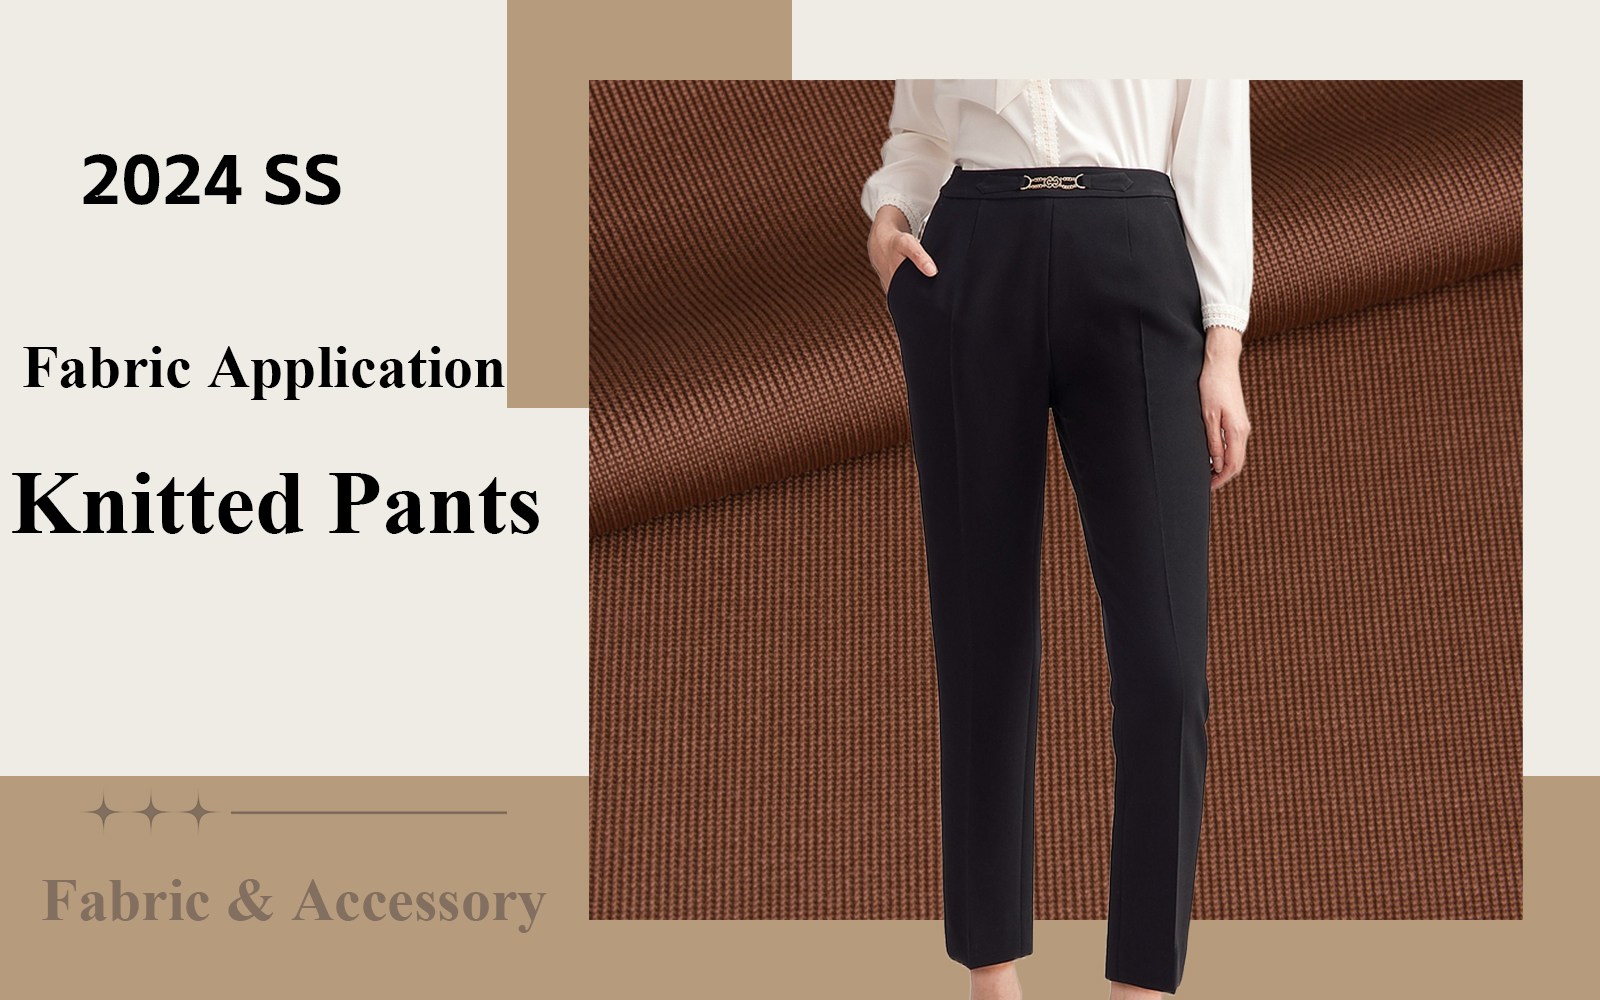 The Fabric Trend for Women's Knitted Pants